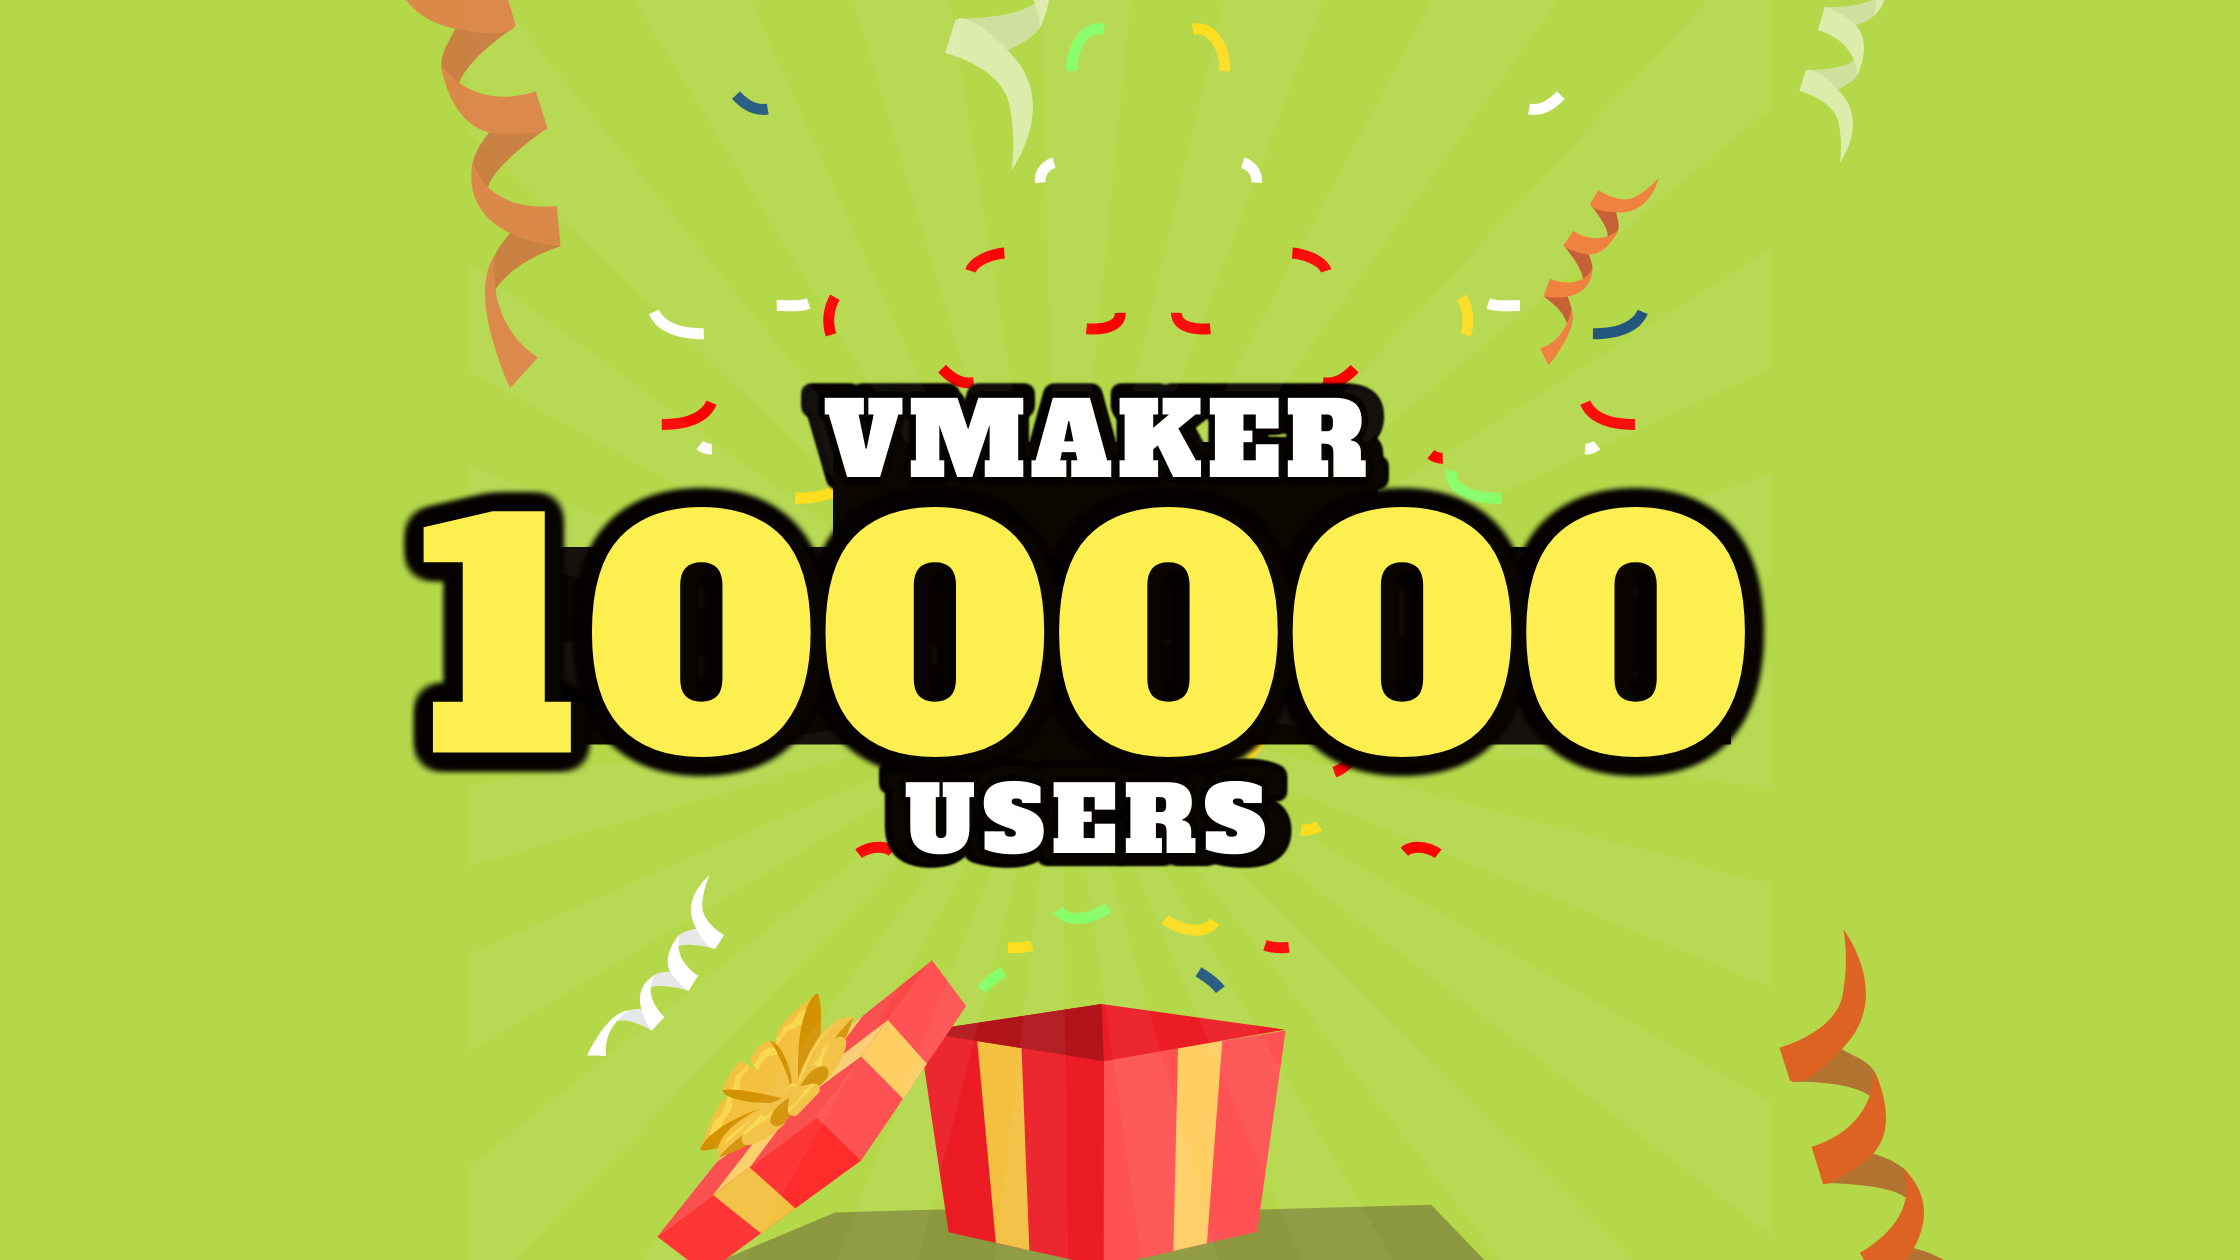 Vmaker reaches 100000+ users